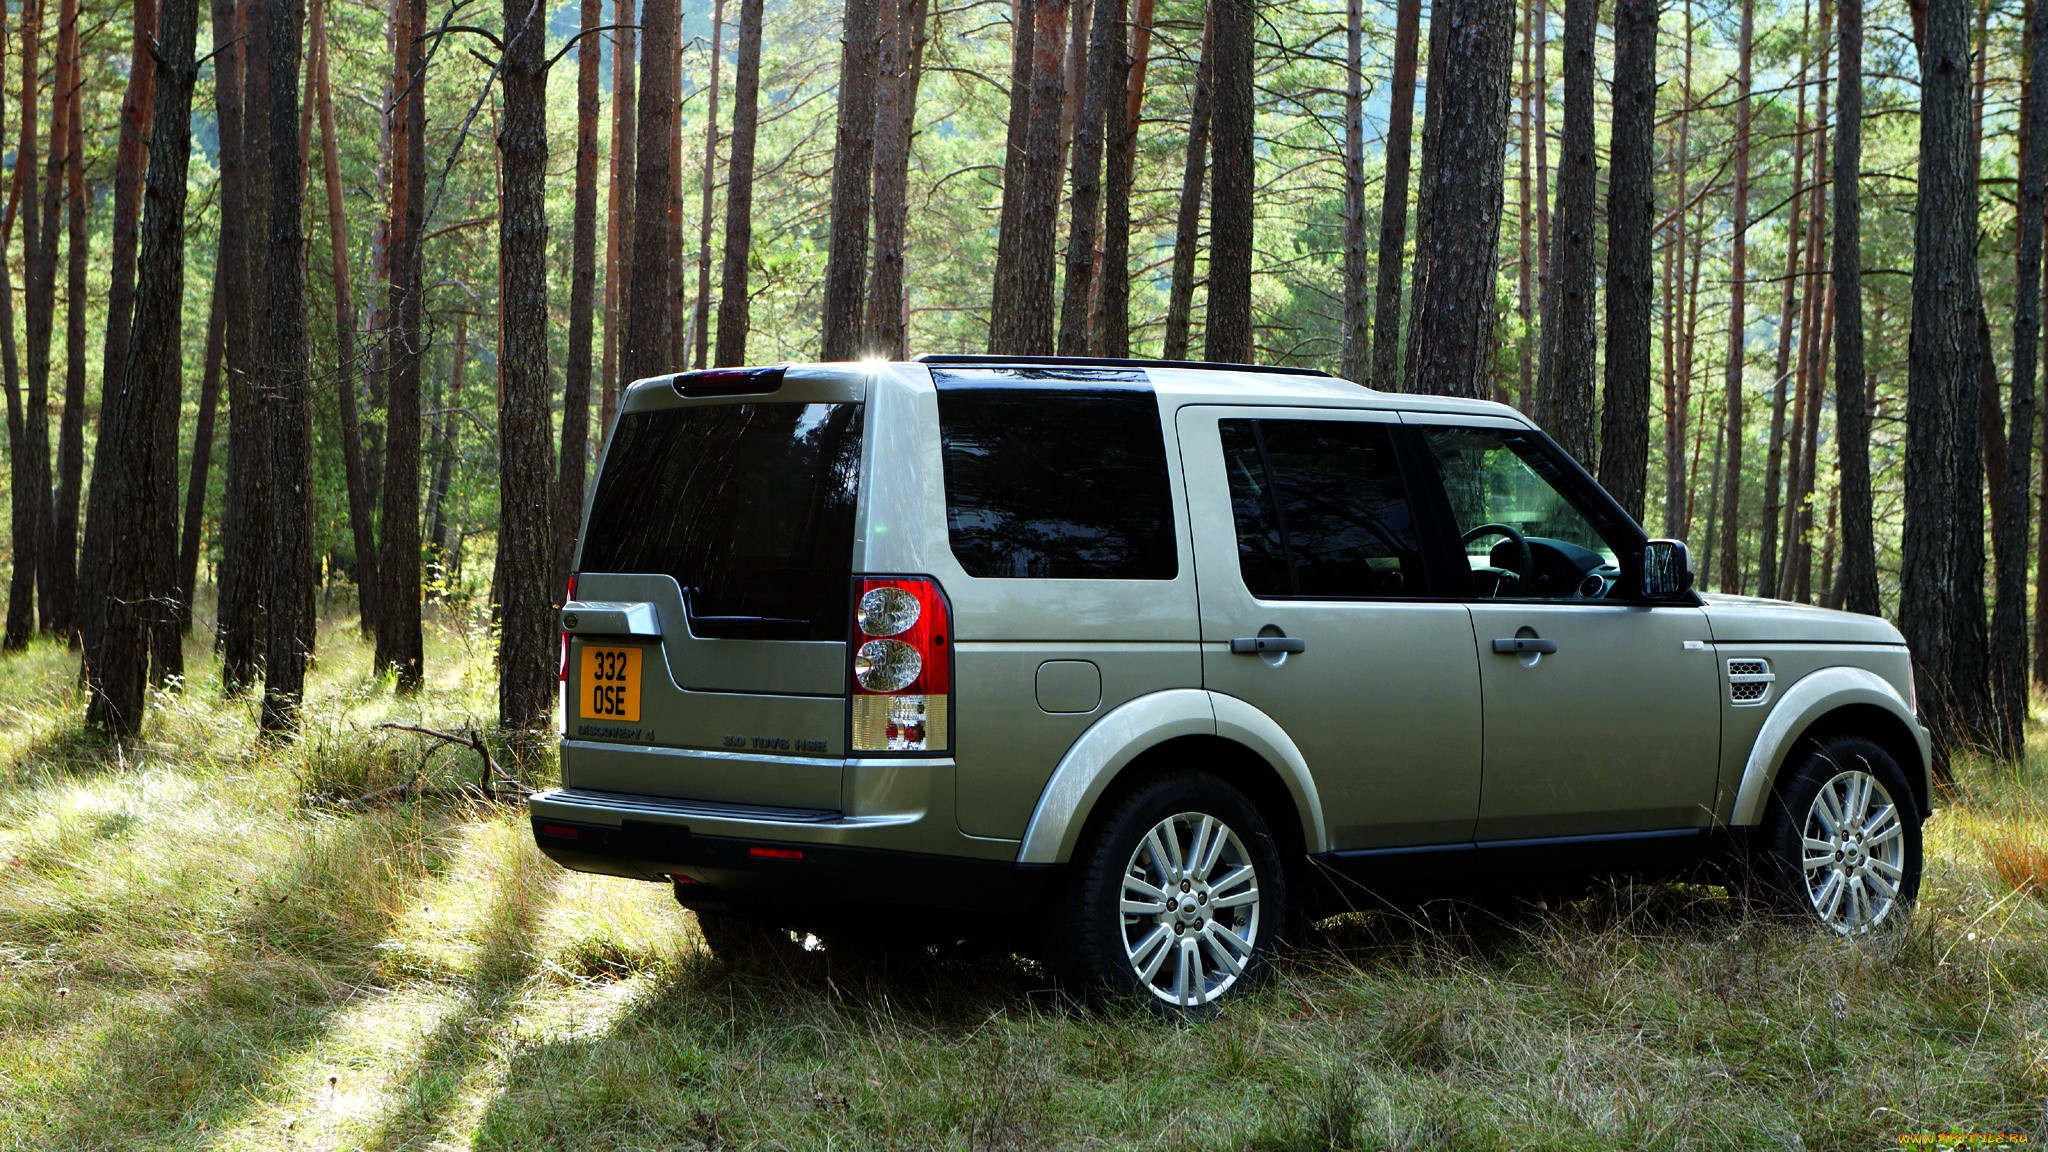 Ело дискавери. Land Rover Discovery 4. Ленд Ровер Дискавери 4 2009. Land Rover Discovery 2010. Land Rover Discovery tdv6.